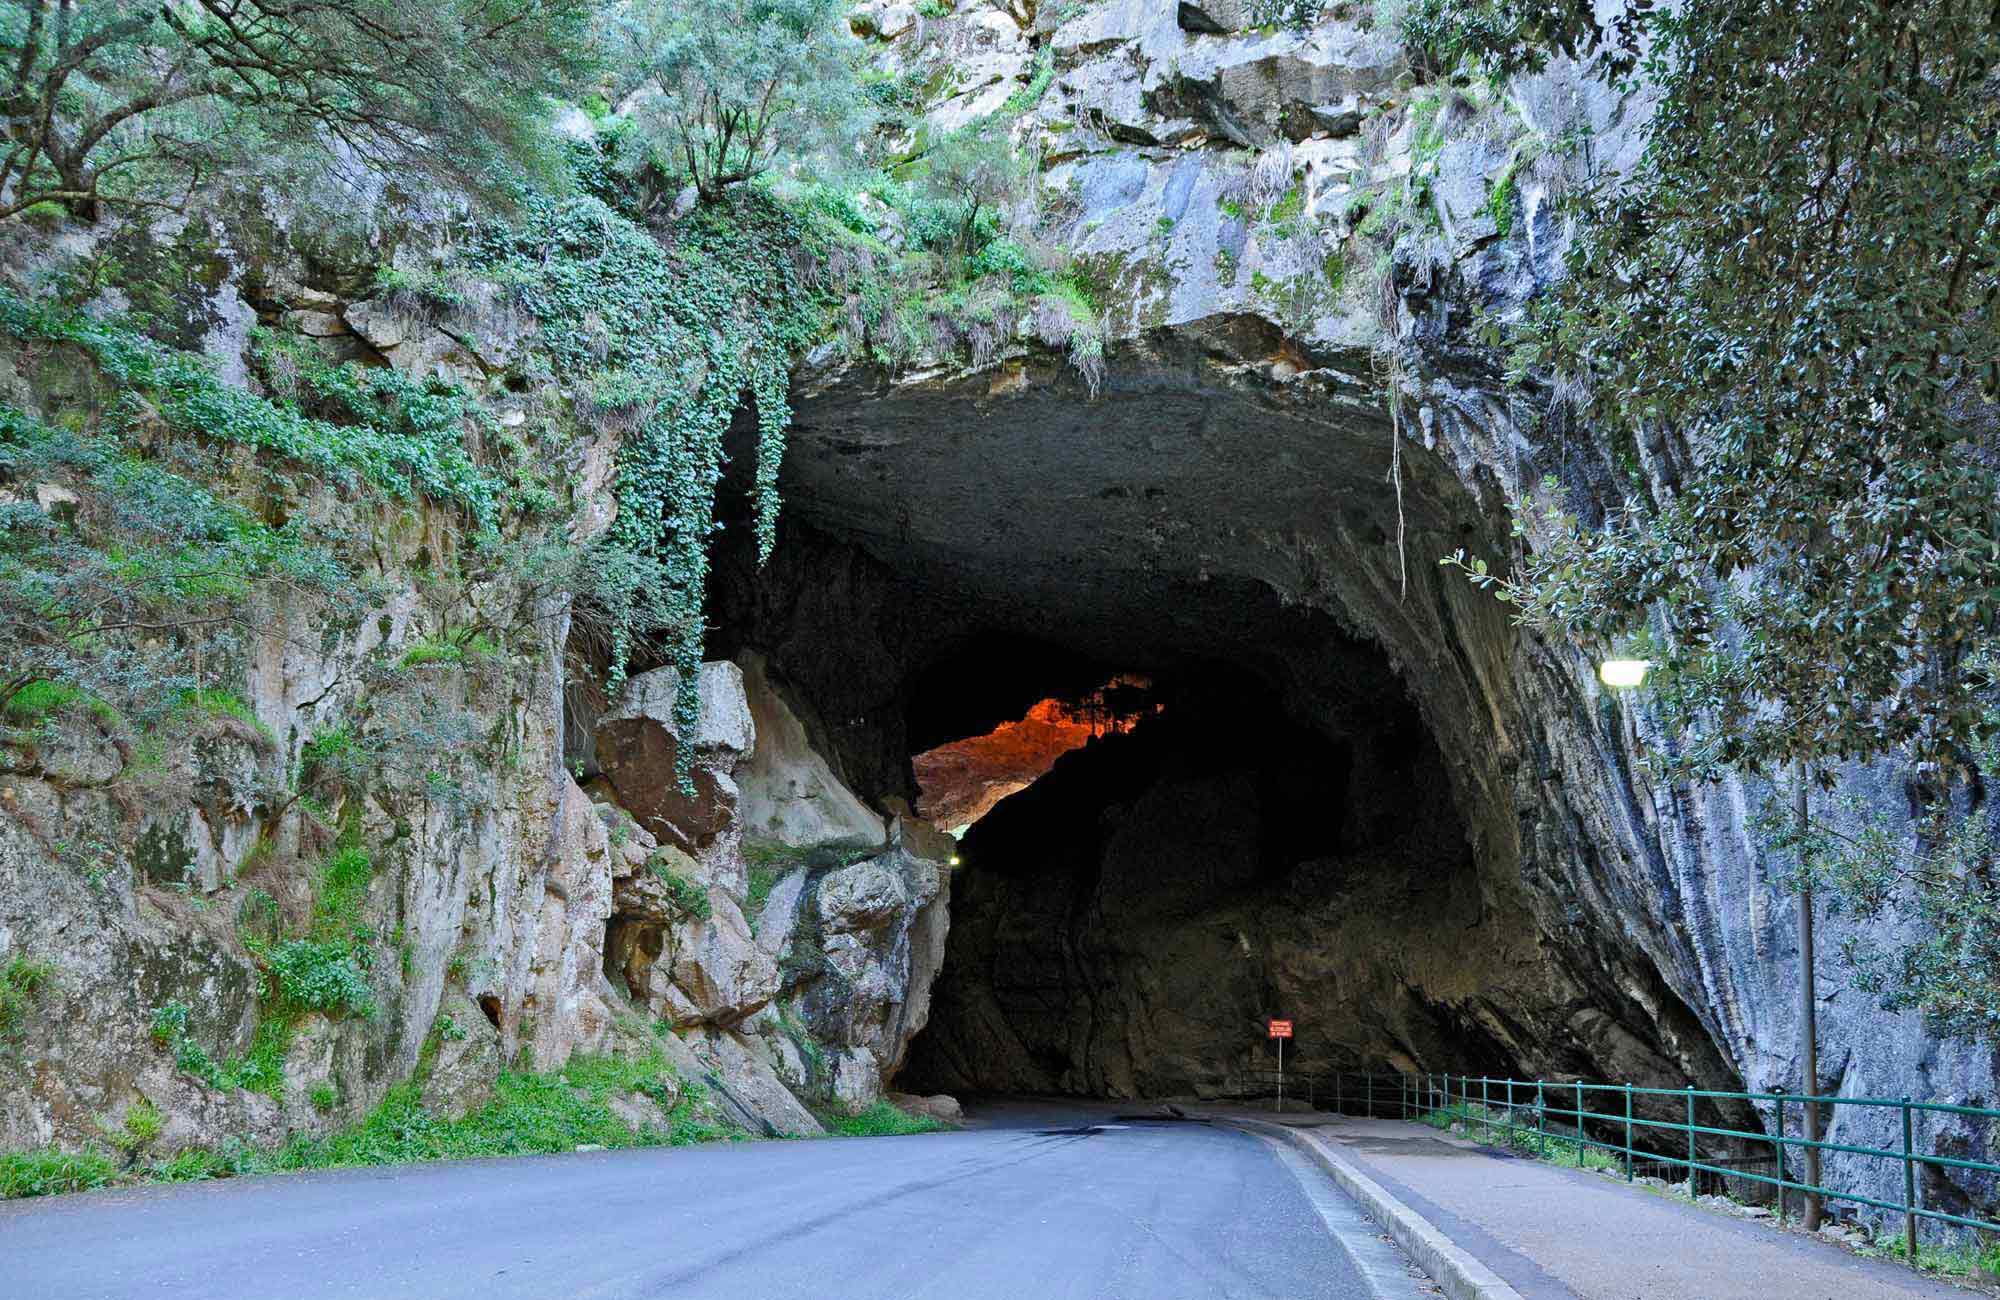 A road goes through a rock tunnel at the entrance to Jenolan Caves, in Jenolan Karst Conservation Reserve. Photo: Kevin McGrath/DPIE